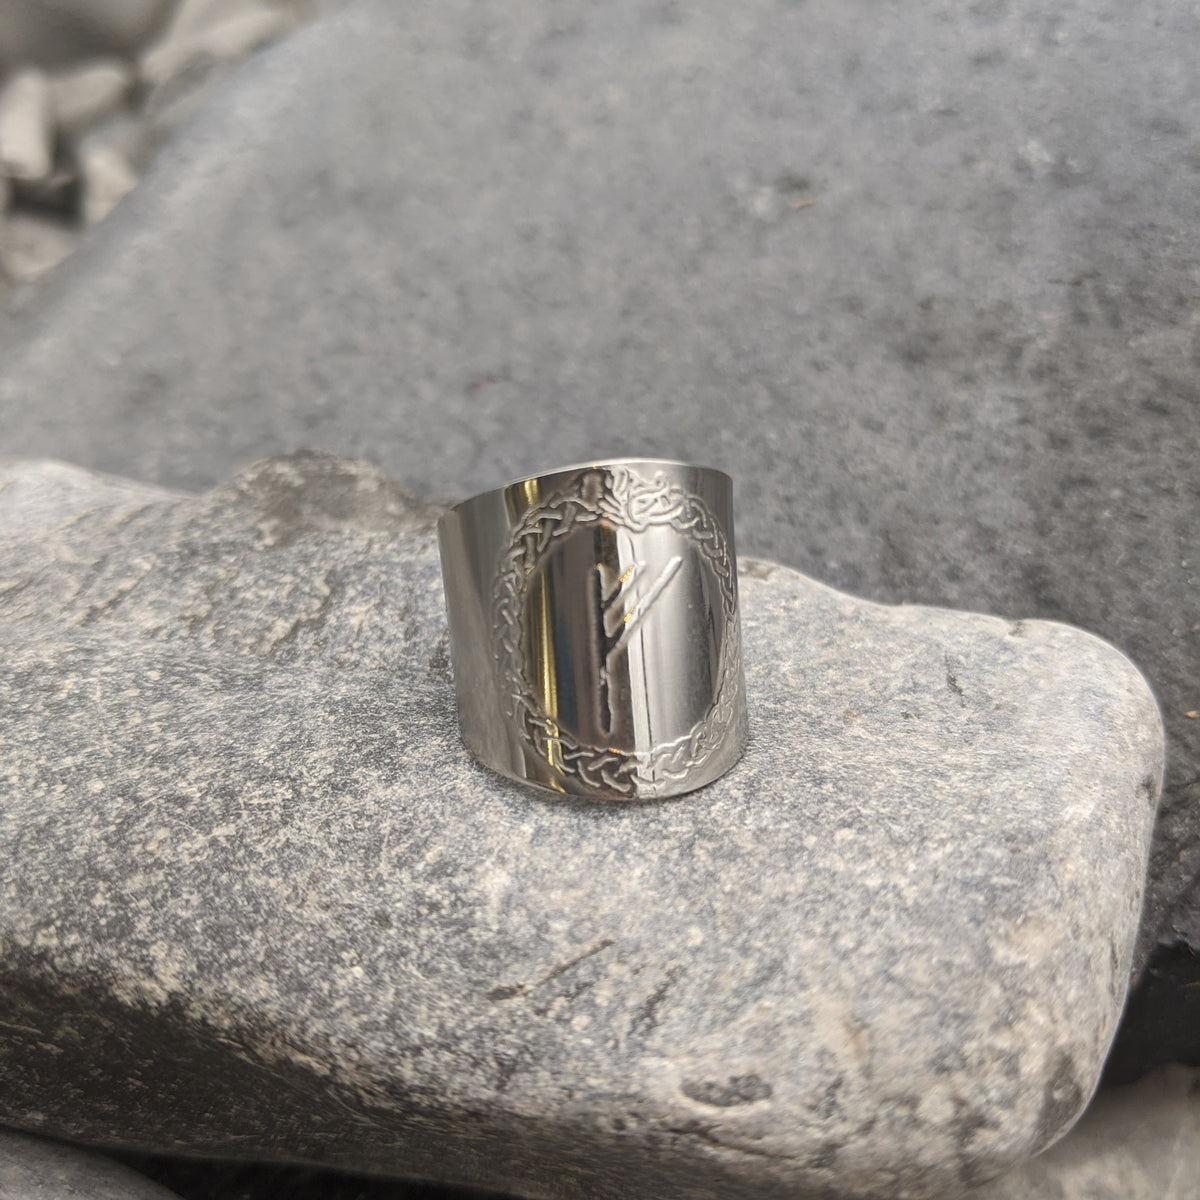 Rune shield ring (Younger Futhark) Steel